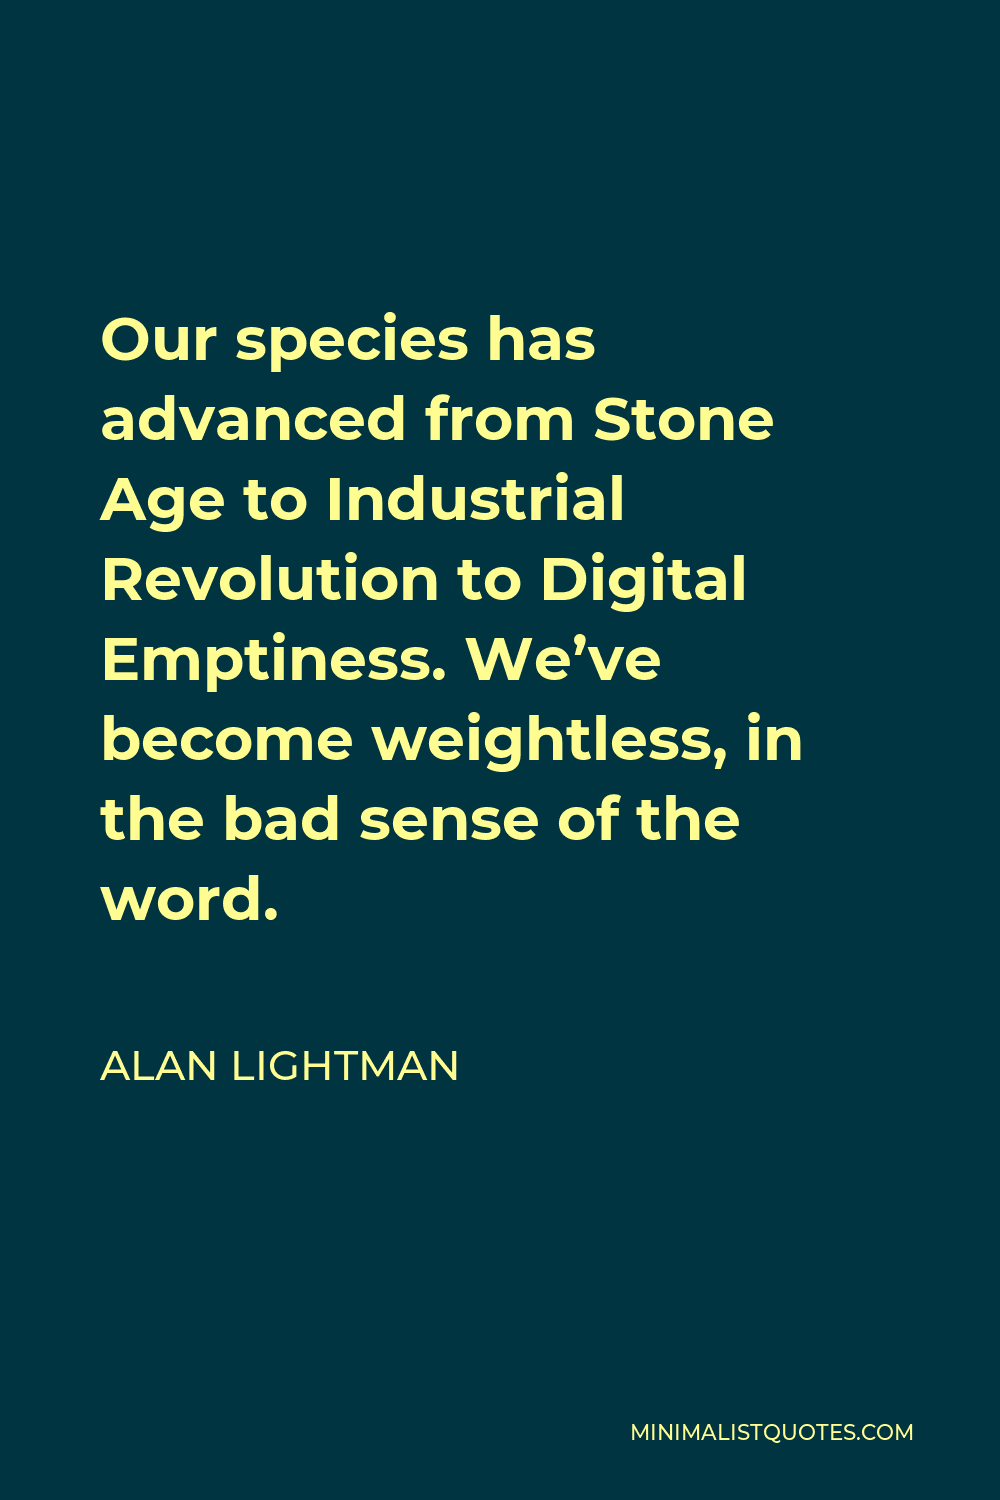 Alan Lightman Quote - Our species has advanced from Stone Age to Industrial Revolution to Digital Emptiness. We’ve become weightless, in the bad sense of the word.